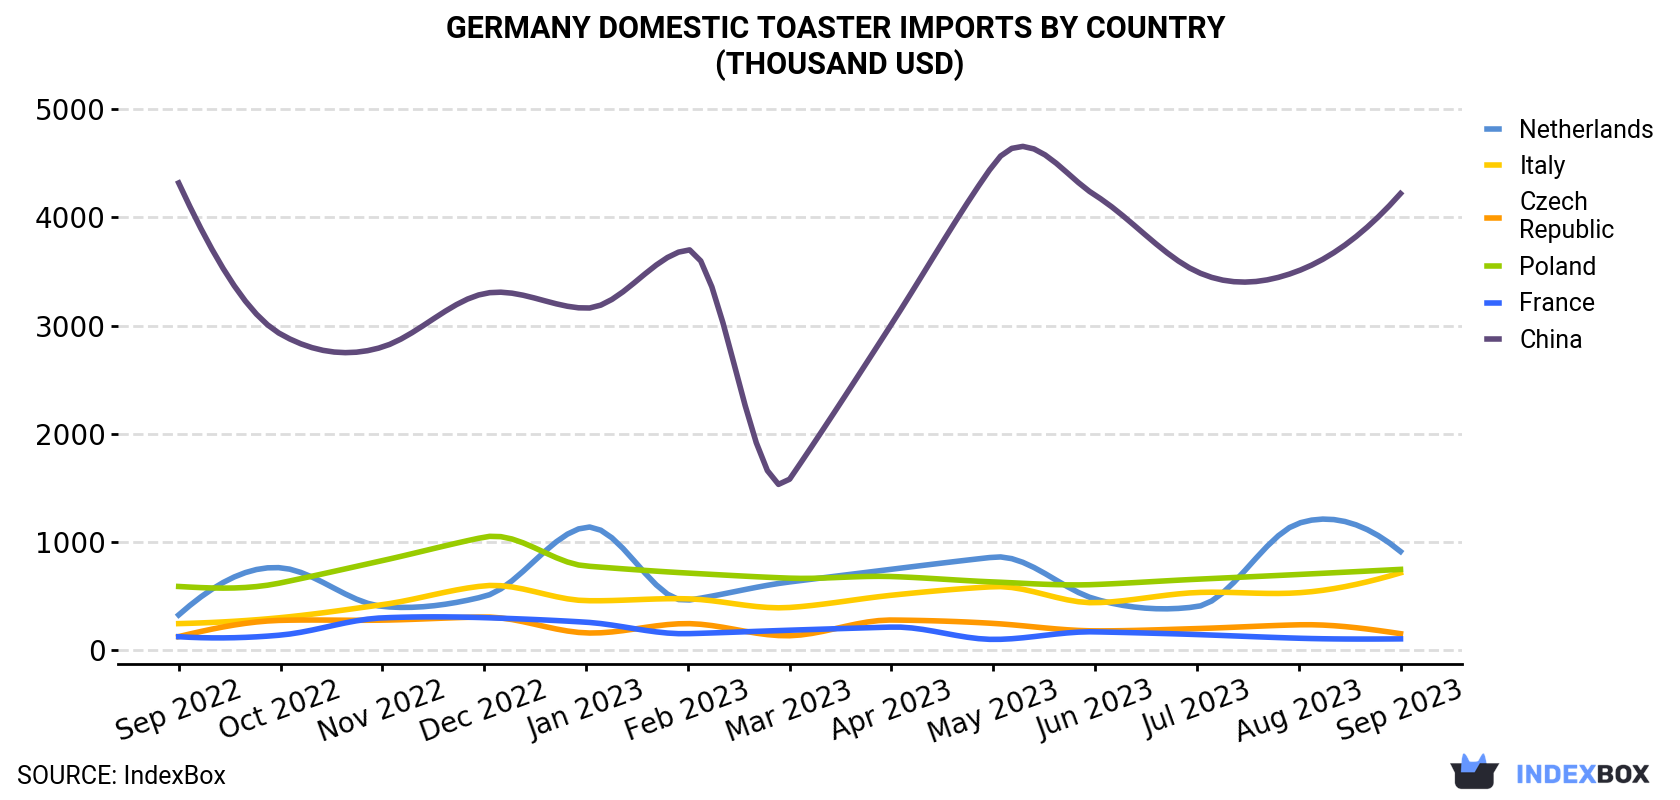 Germany Domestic Toaster Imports By Country (Thousand USD)